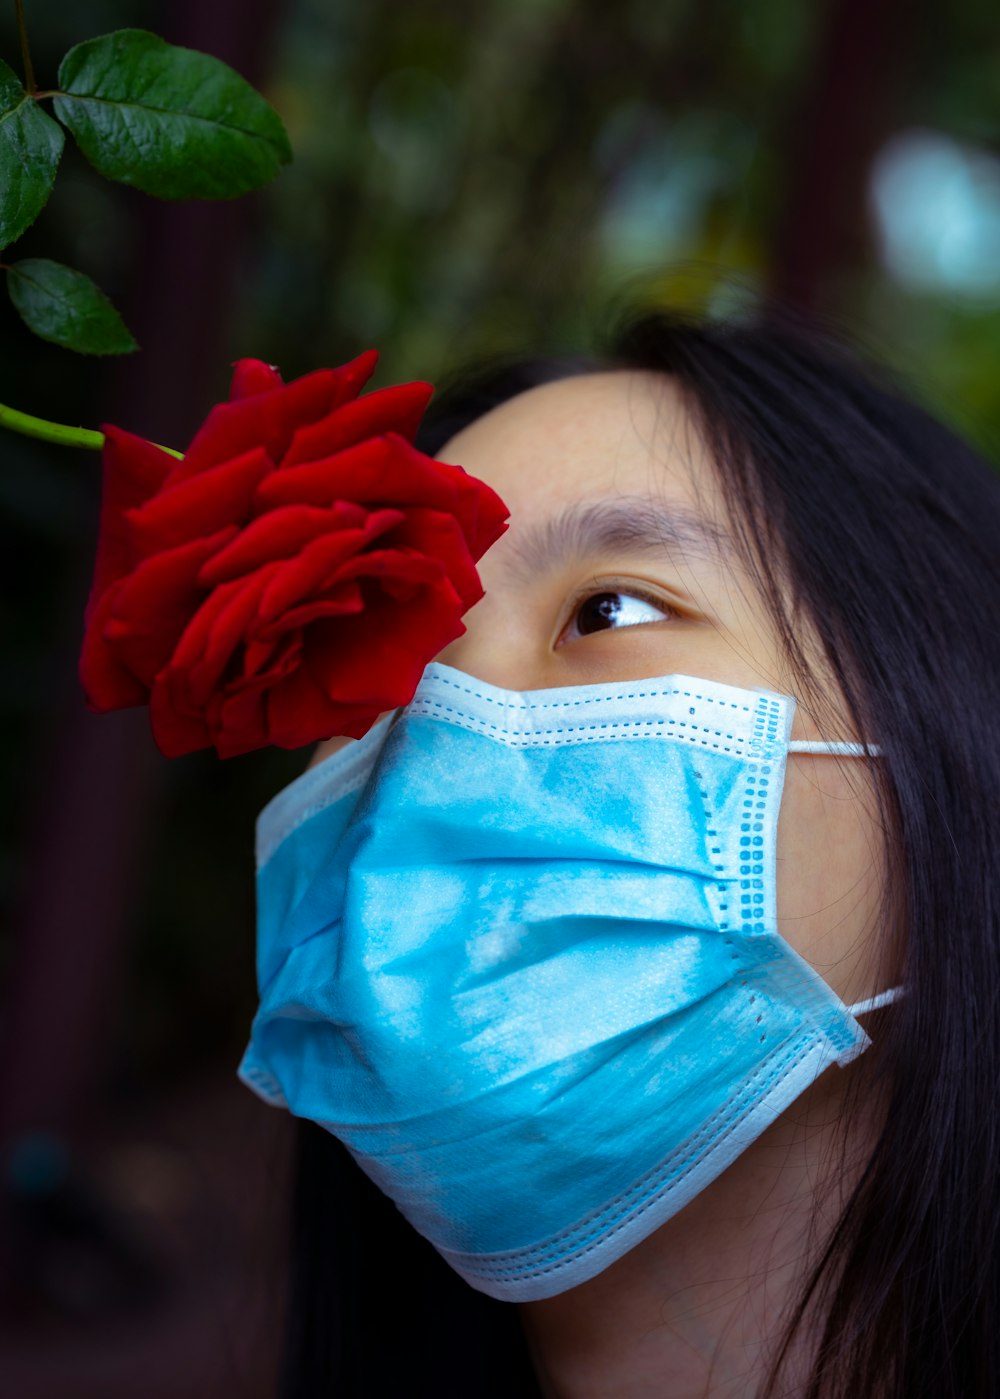 a woman wearing a face mask and a red rose